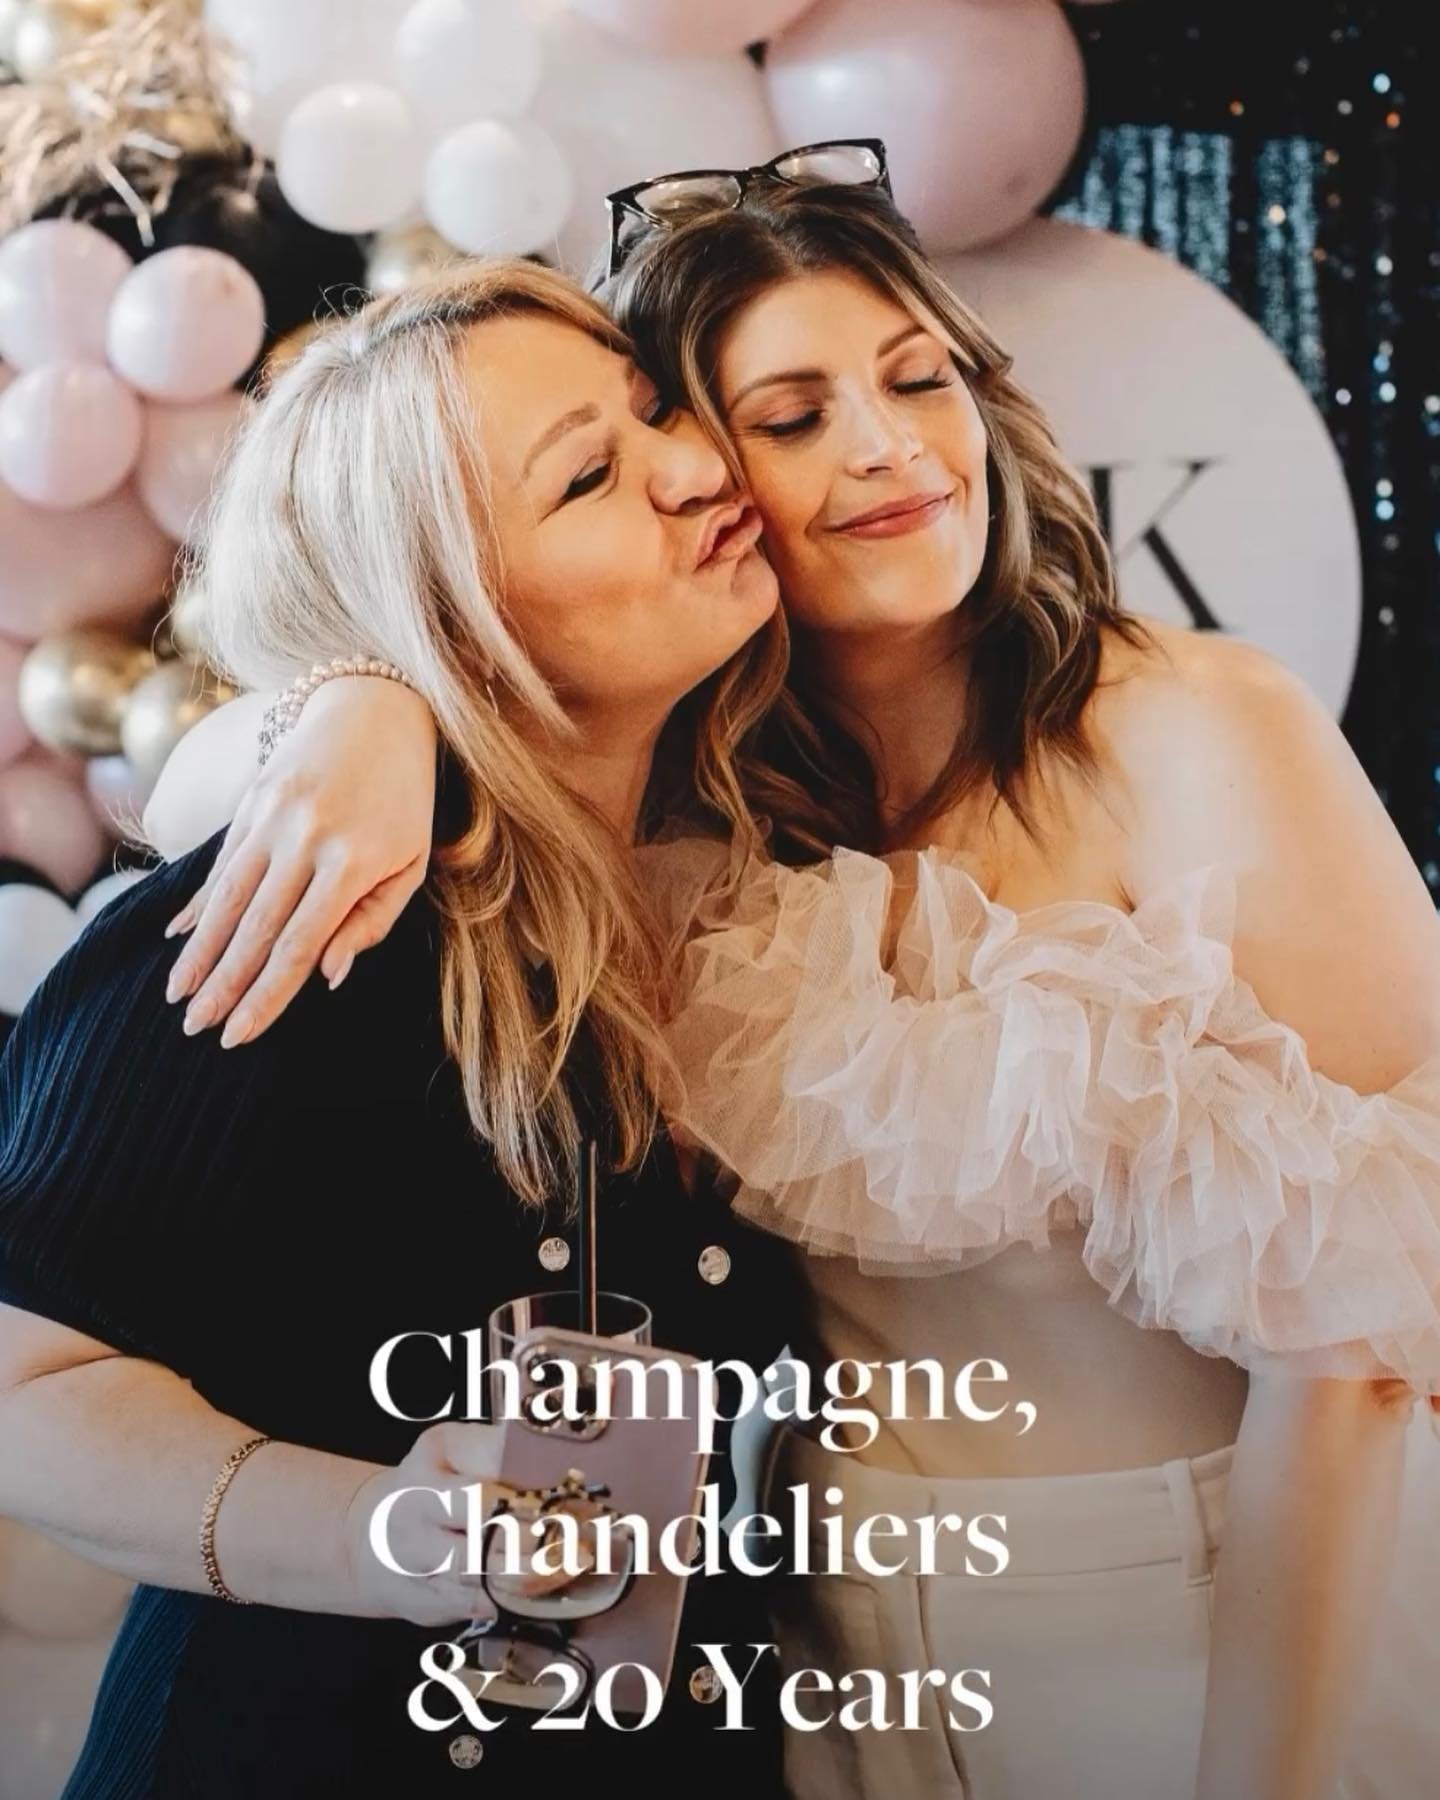 I can&rsquo;t believe it&rsquo;s been over TWO weeks since we celebrated &ldquo;Champagne, Chandelier&rsquo;s and 20 years&rdquo; with our extended friends, family, clients and community of @chkrealestate! 

What a night to remember. Thank you to eve